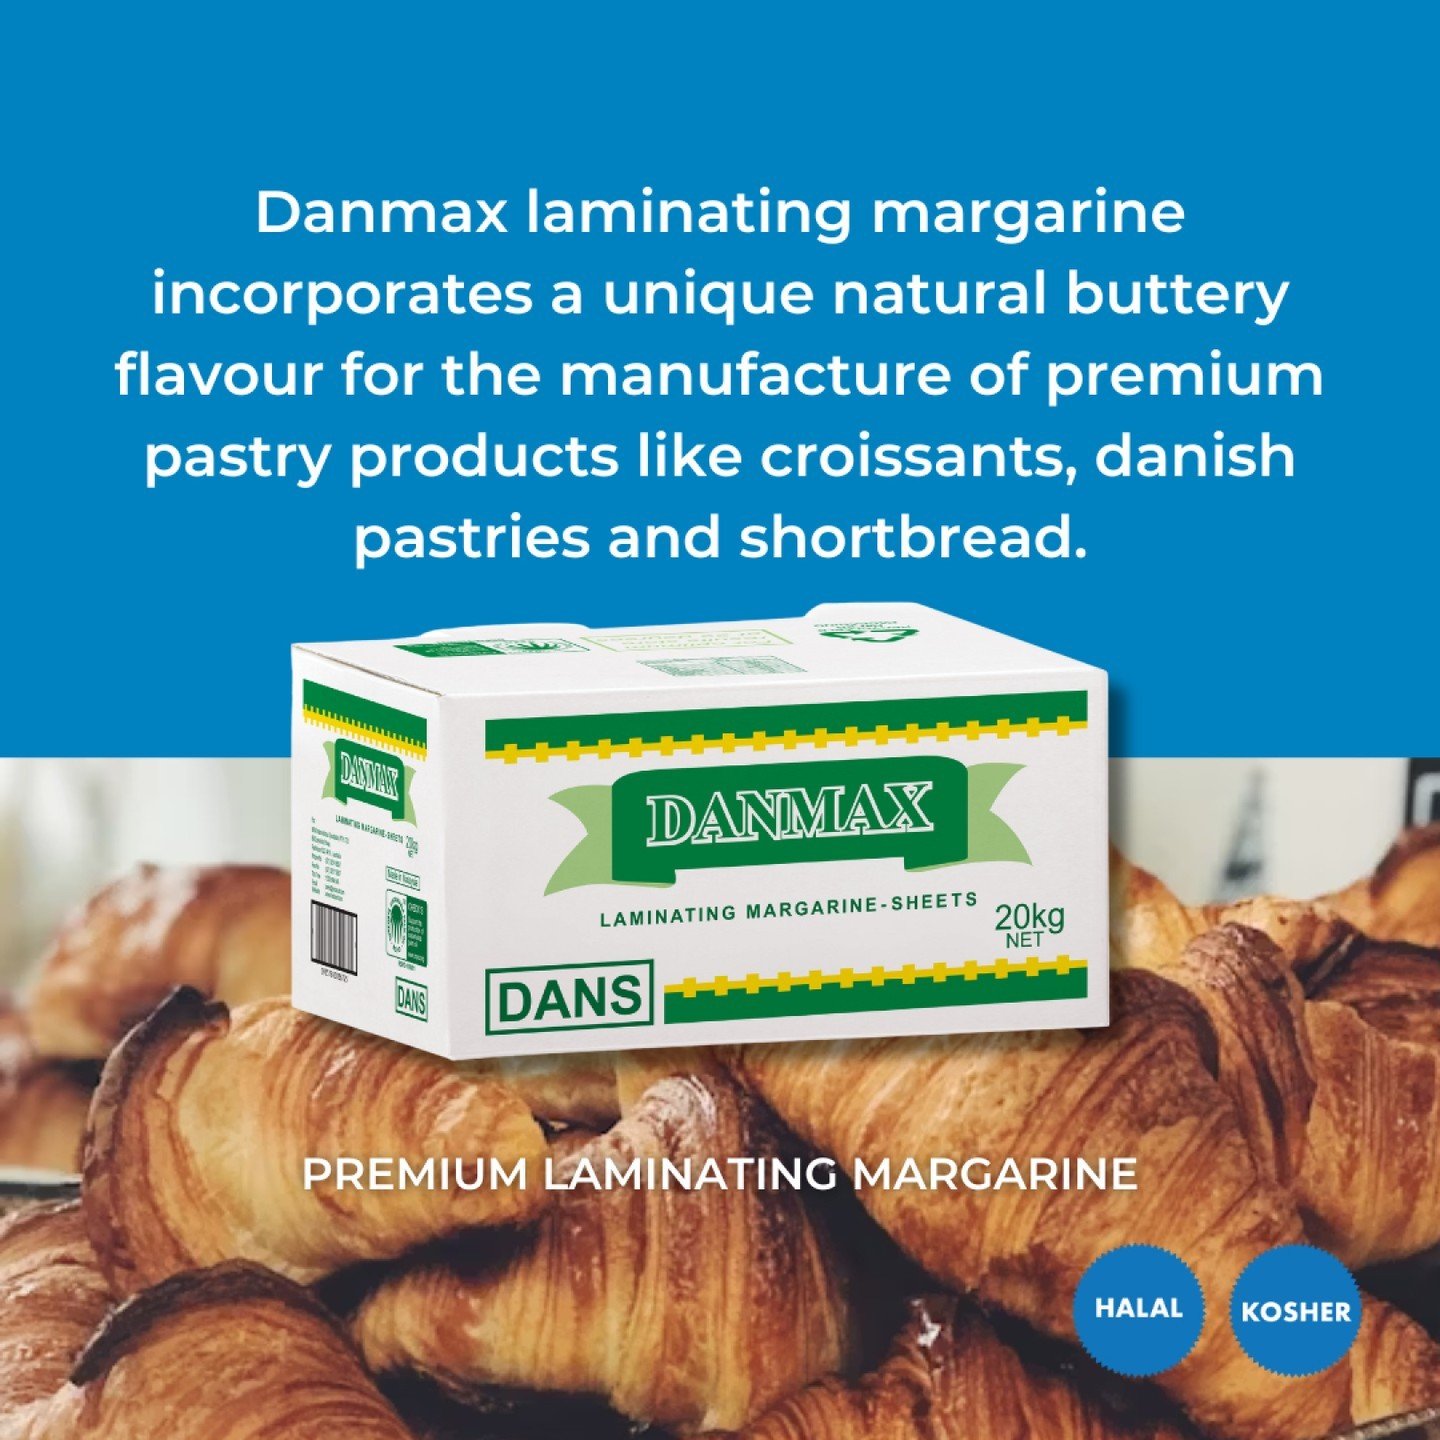 Danmax laminating margarine incorporates a unique natural buttery flavour for the manufacture of premium pastry products including criossants, danish pastries and shortbread. 

Available in a 10kg block or 10x 2kg wrapped sheets.

#shortbread #croiss